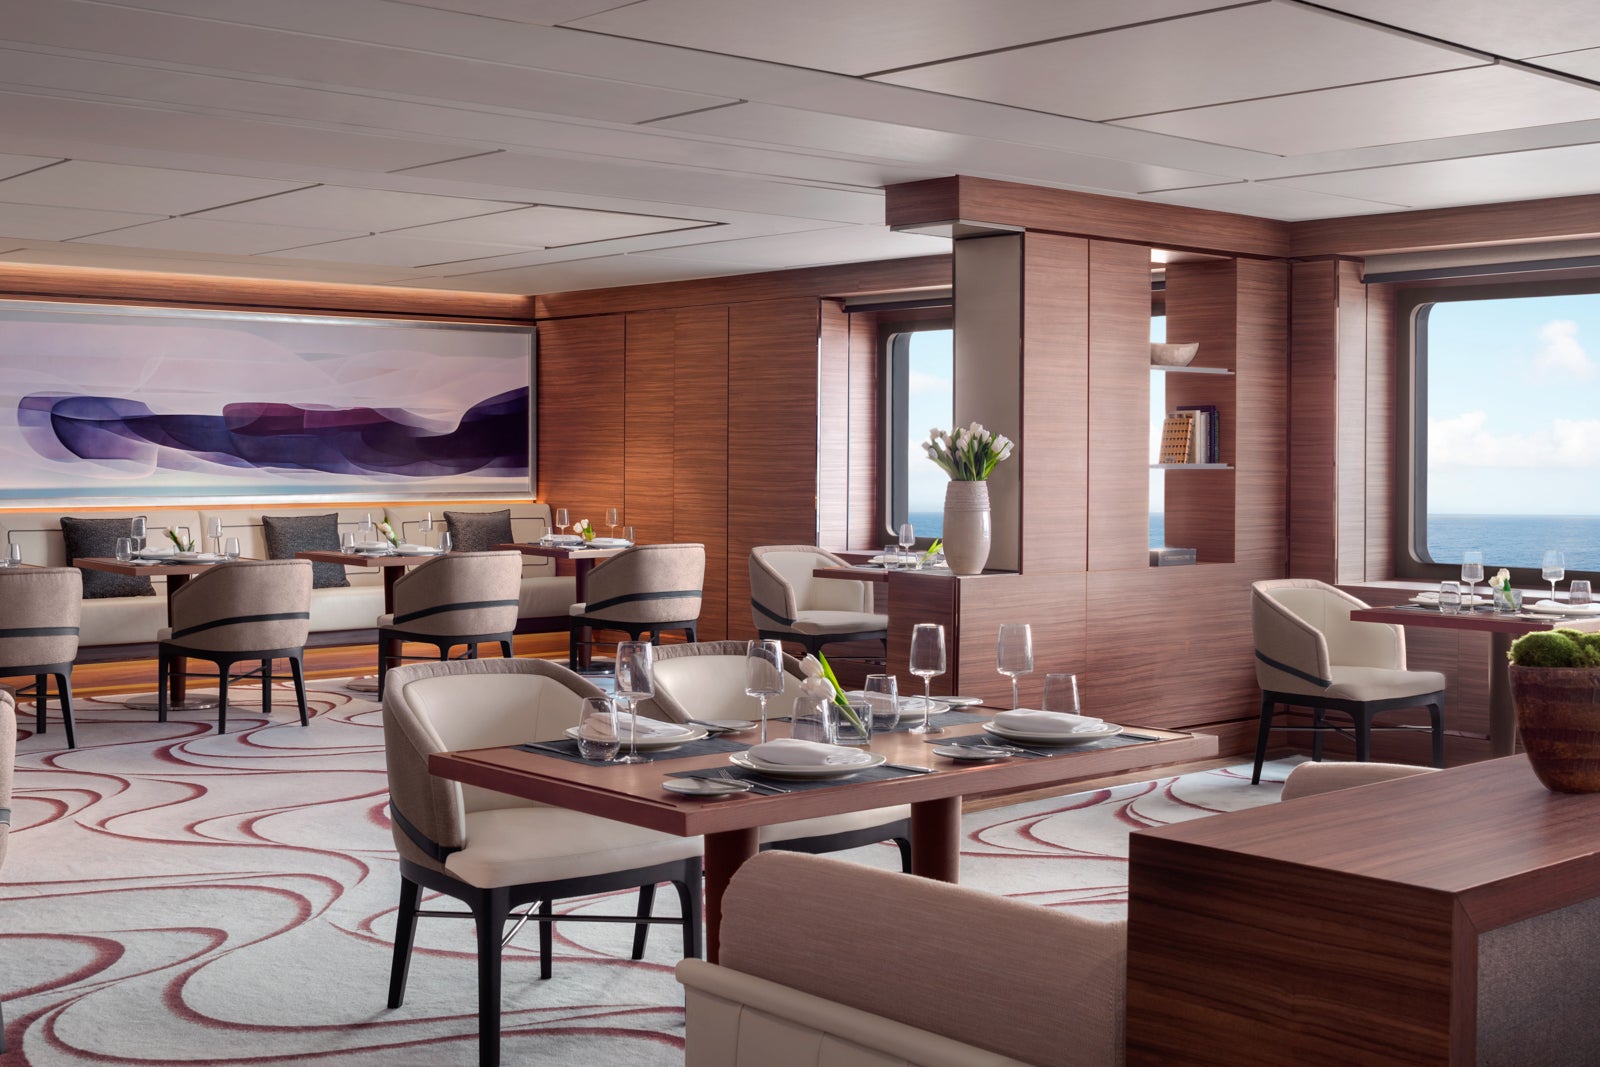 Ritz Carlton Yacht Collection New Ship, the Ilma! Itineraries are